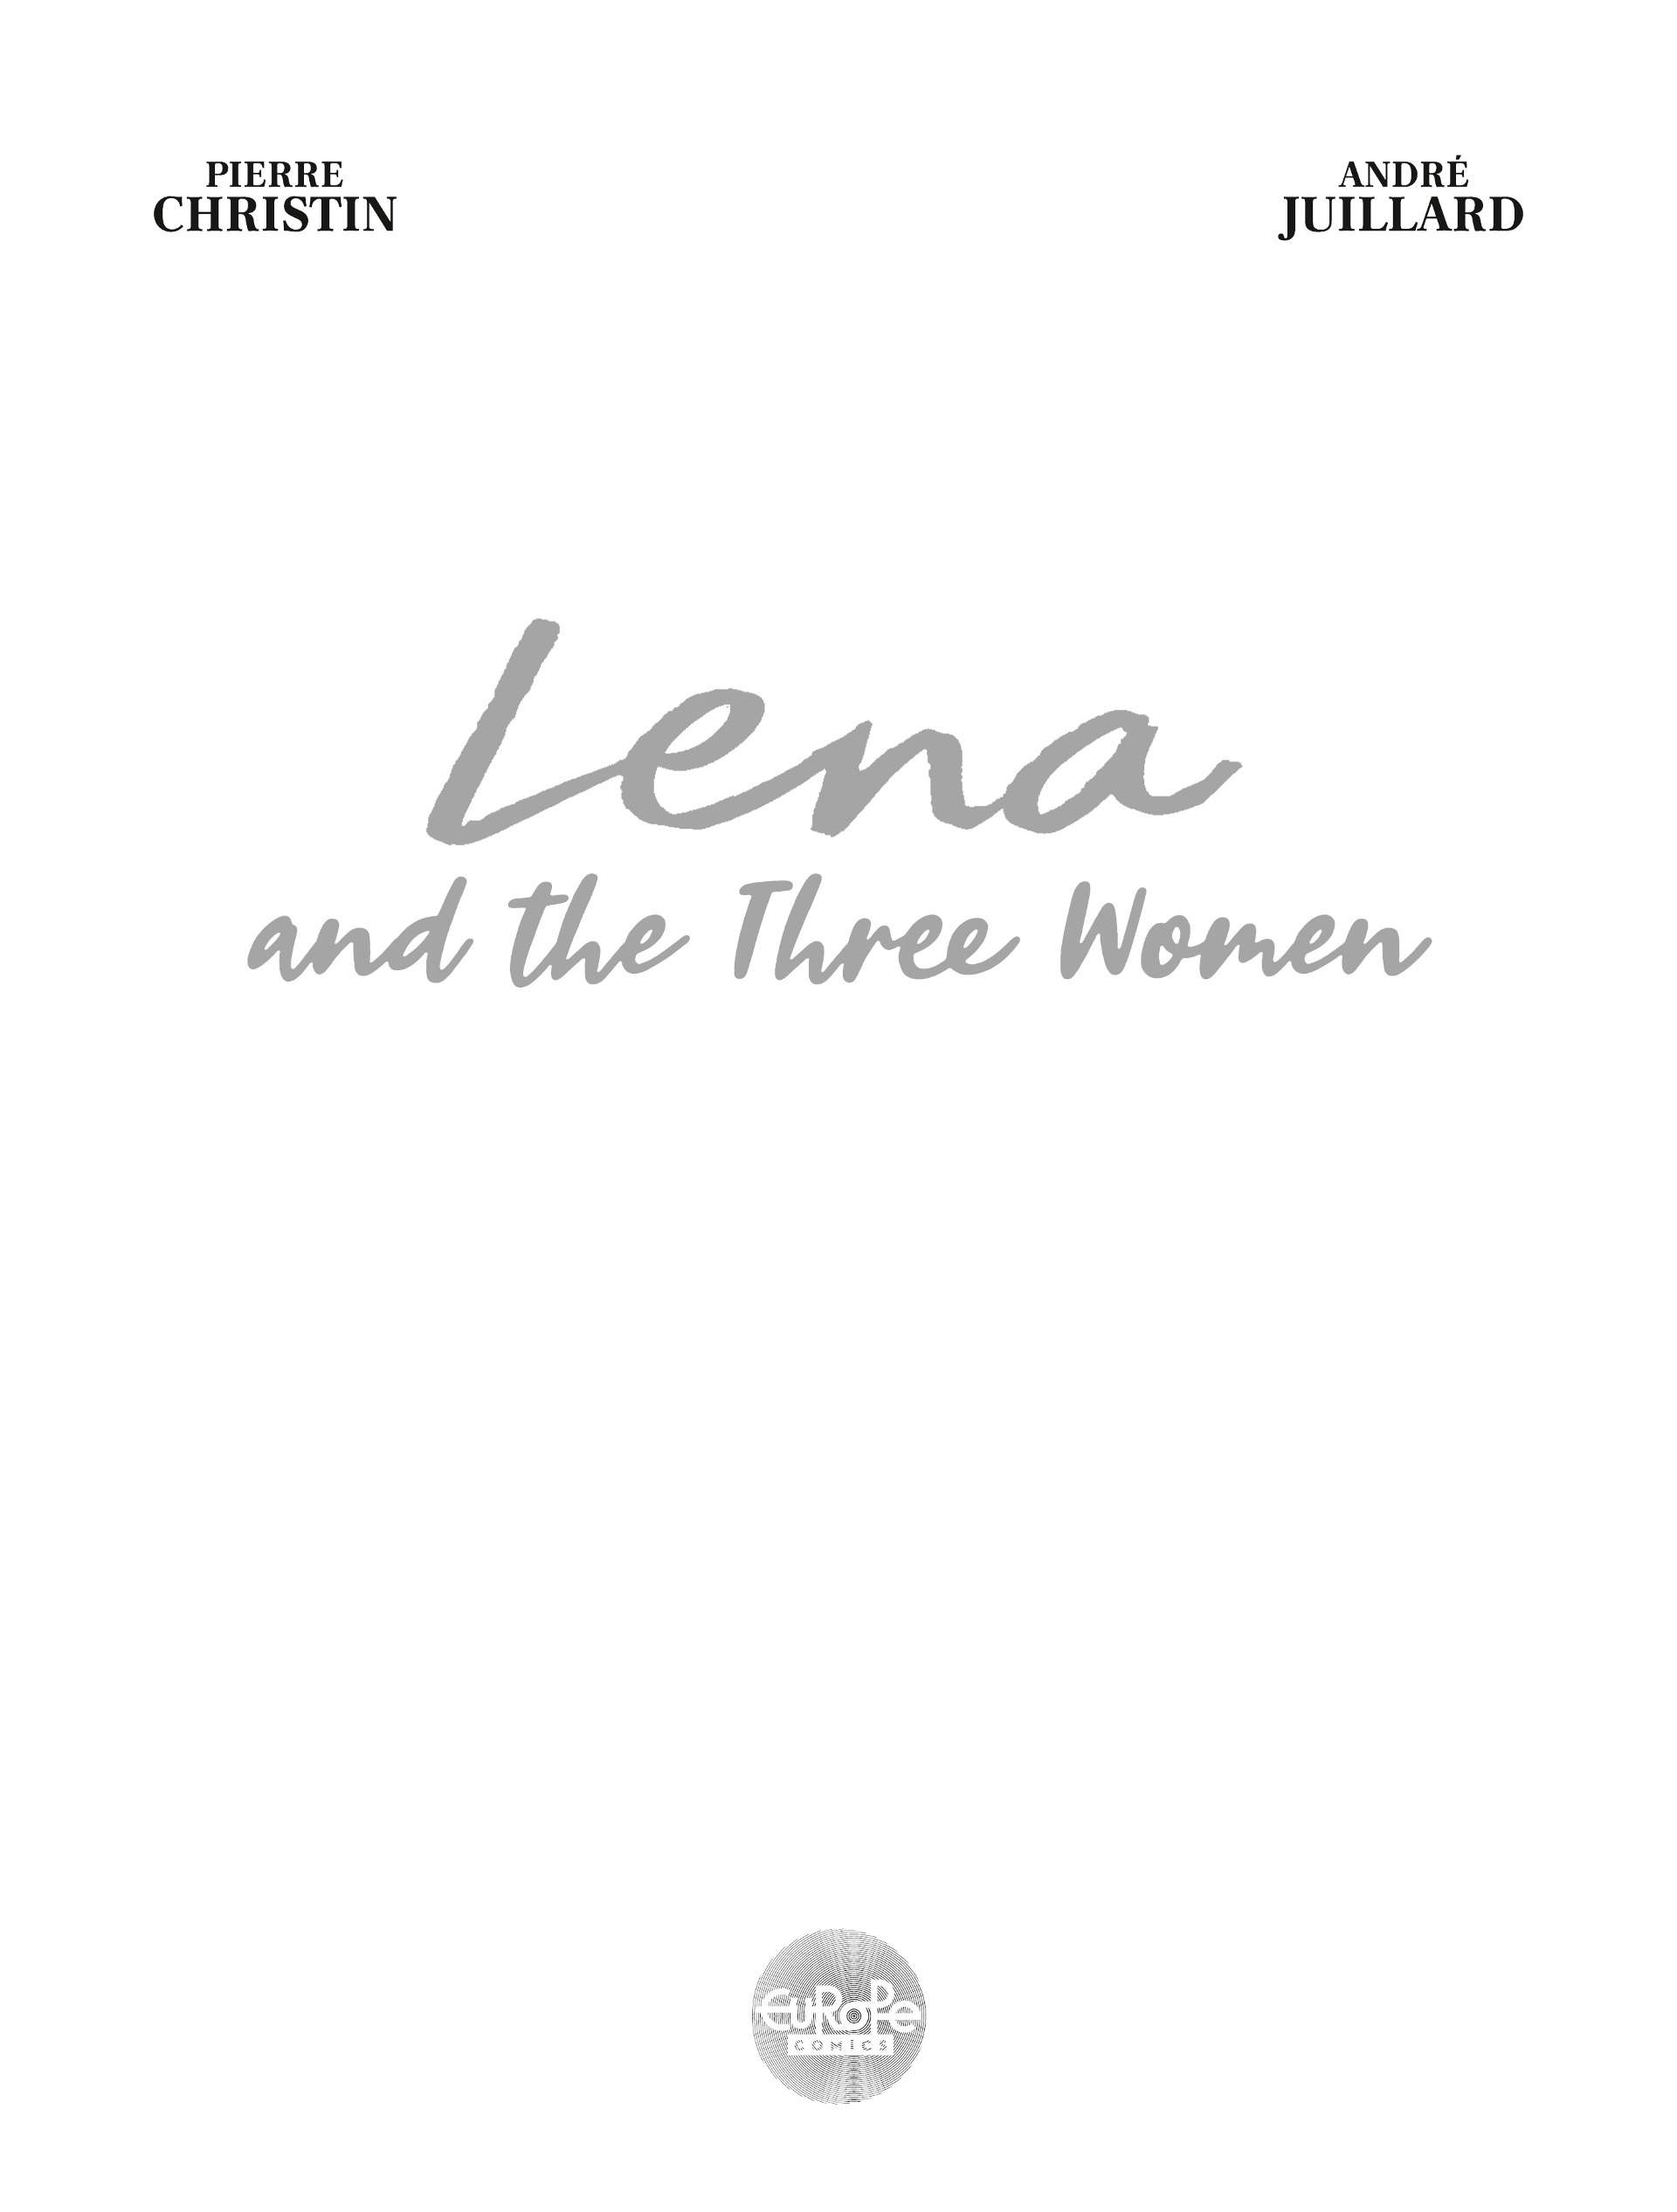 Read online Lena comic -  Issue #2 - 2